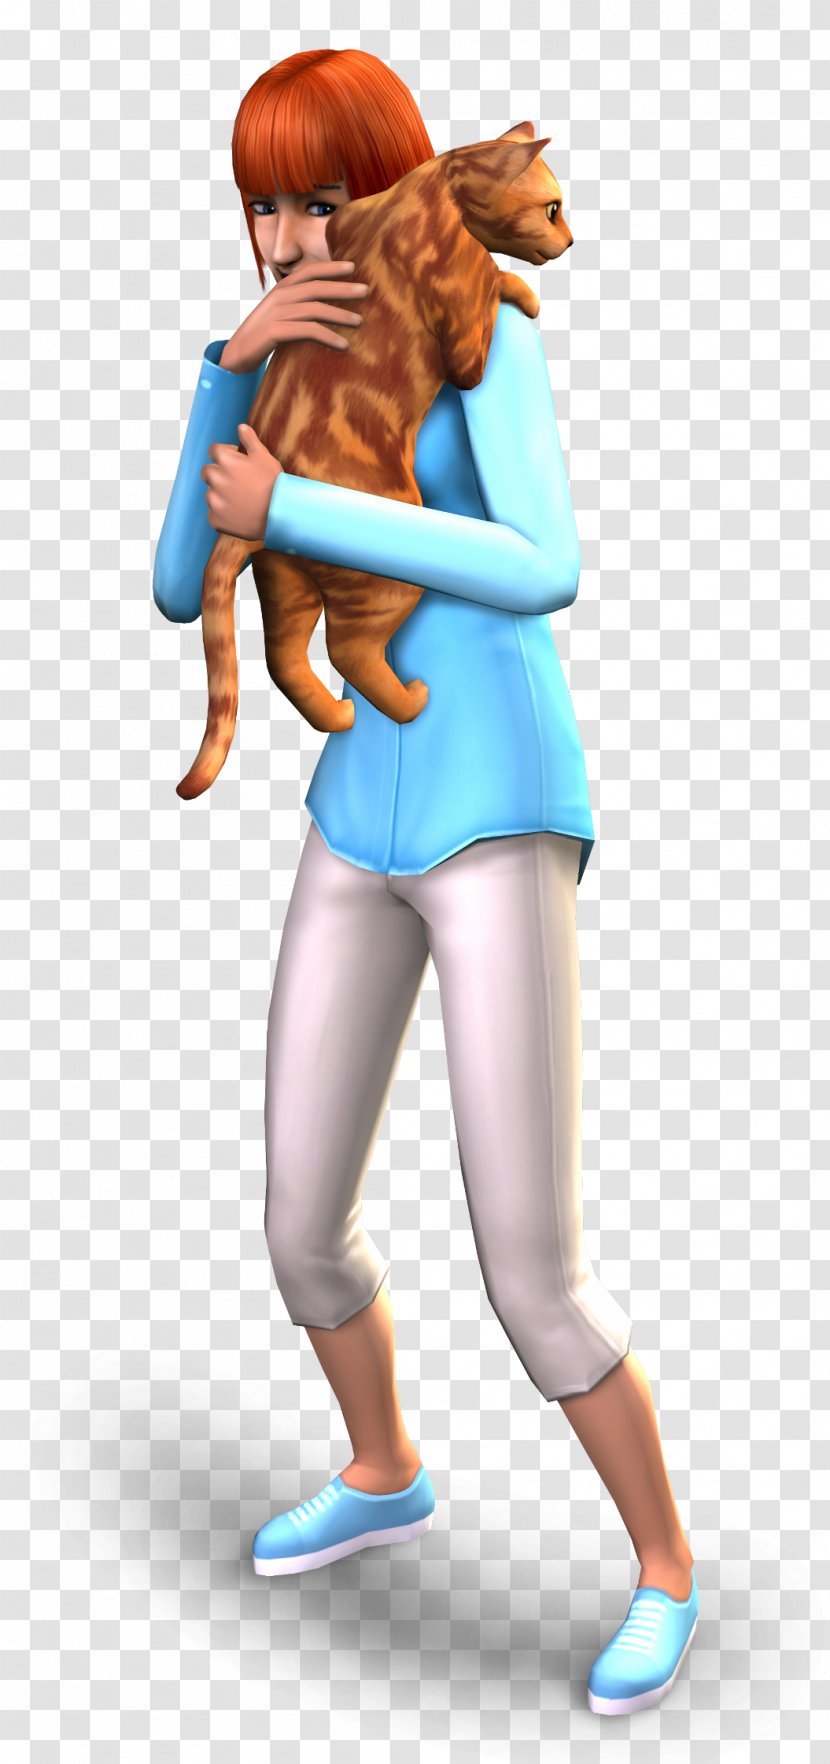 The Sims 2: Pets 3: PlayStation 2 GameCube - Frame Transparent PNG